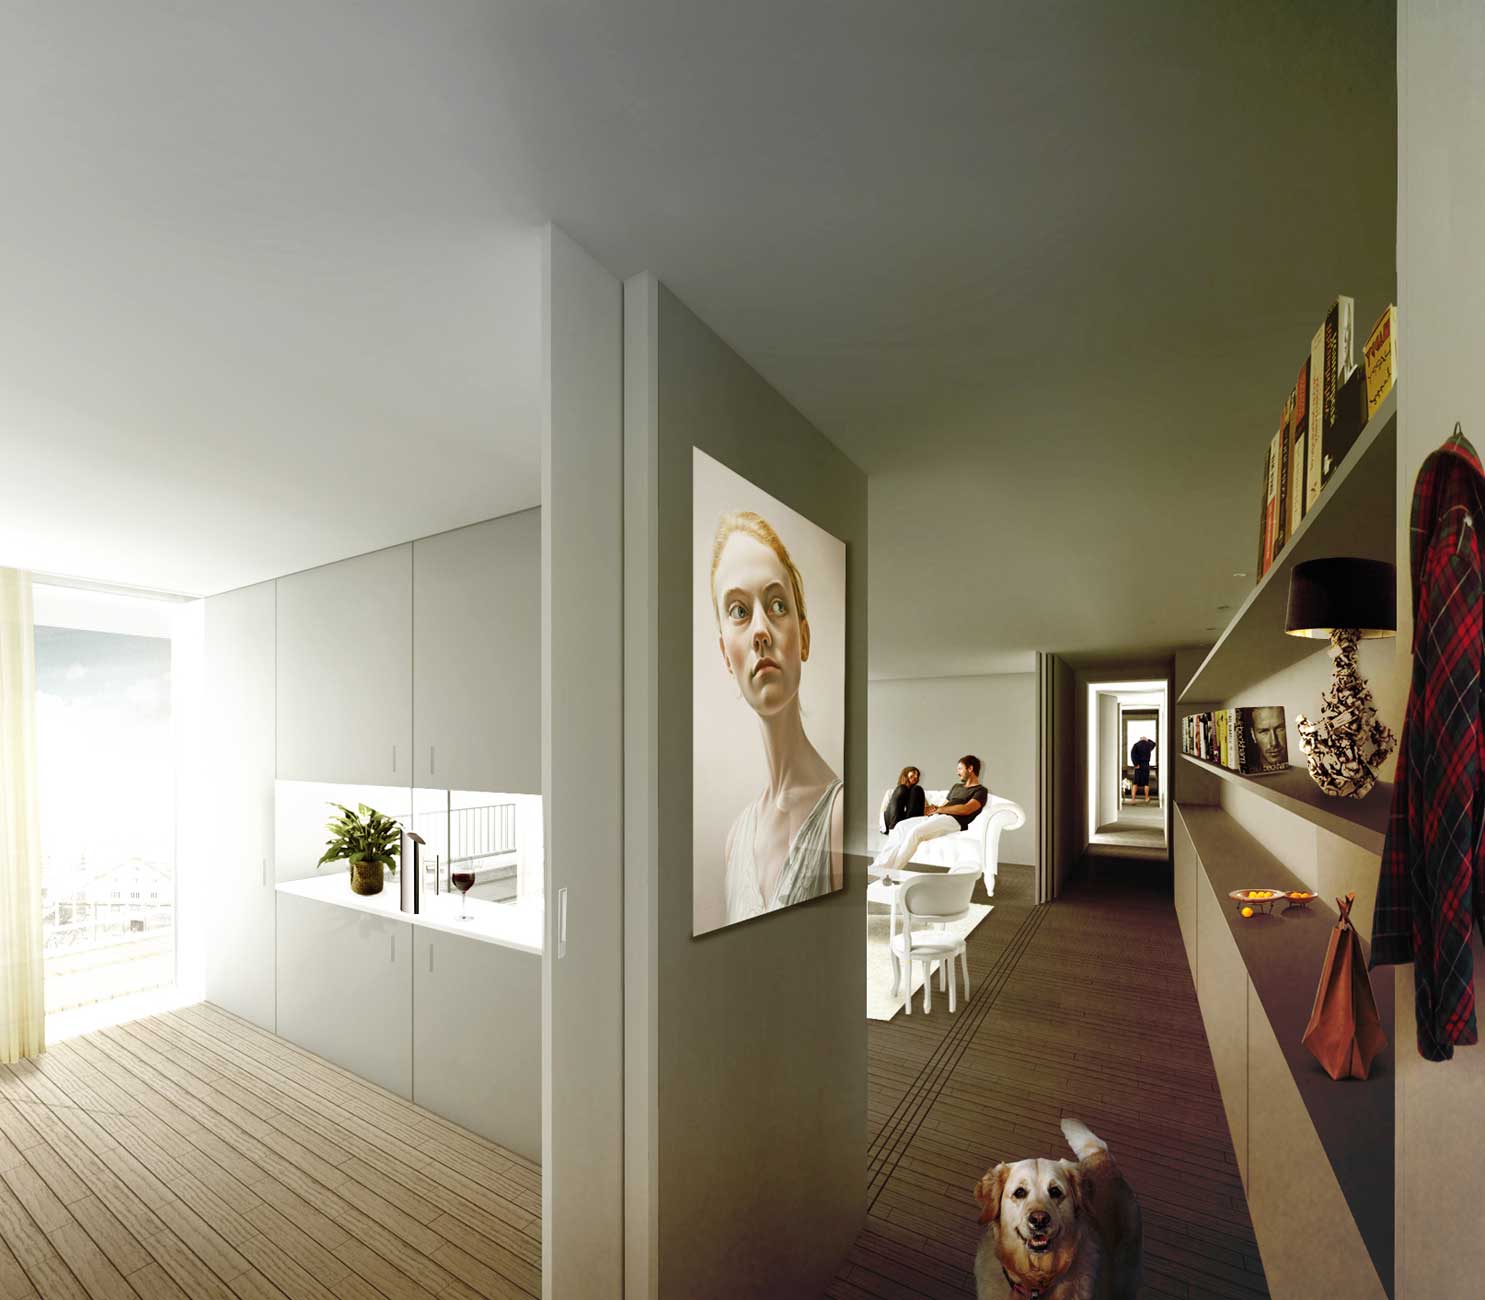 A computer generated image illustrating the interior of the Collective Housing